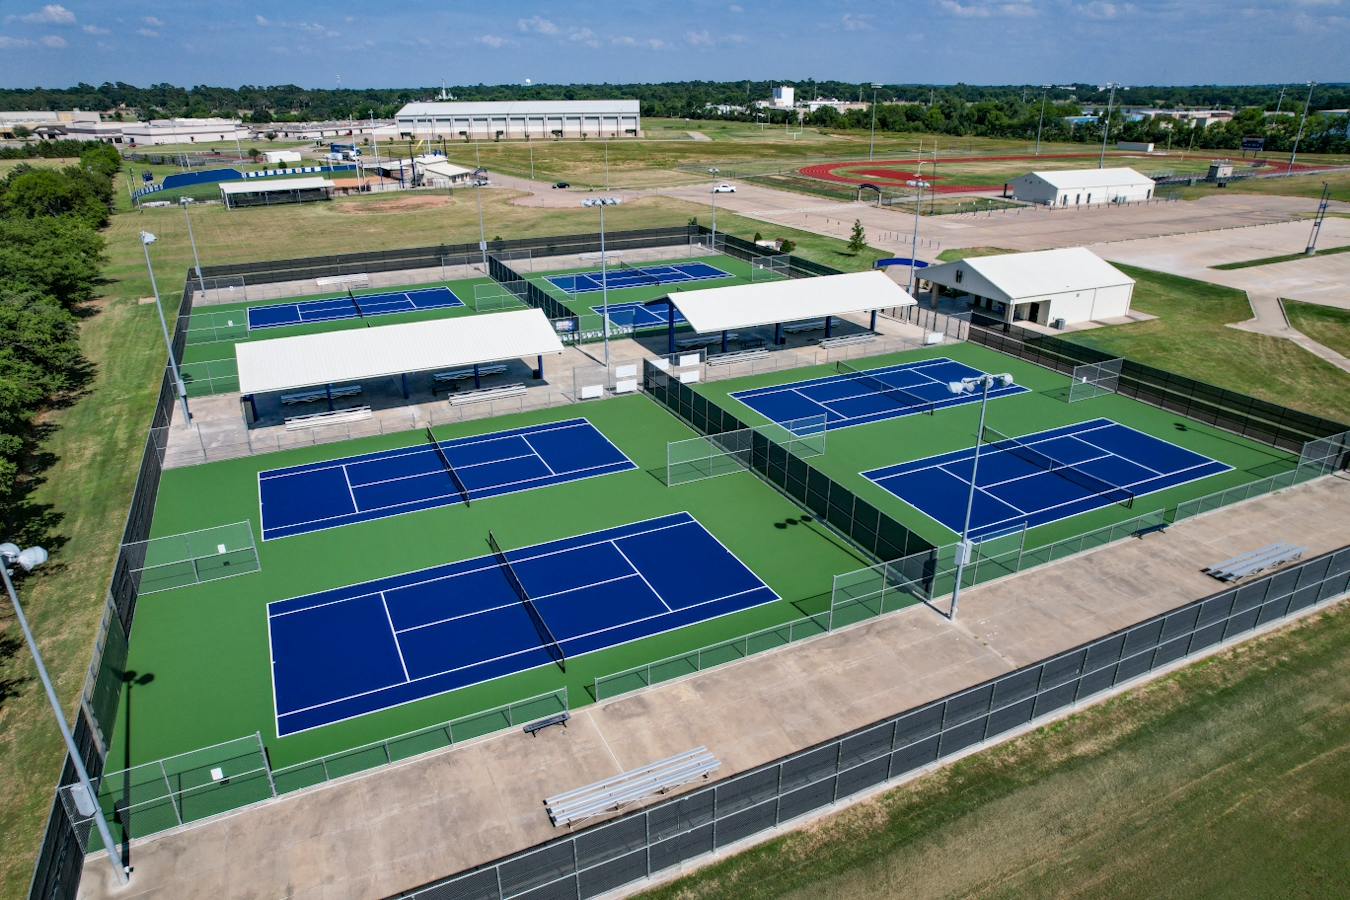 Tennis courts resurfaced will be in action in Friday tournament